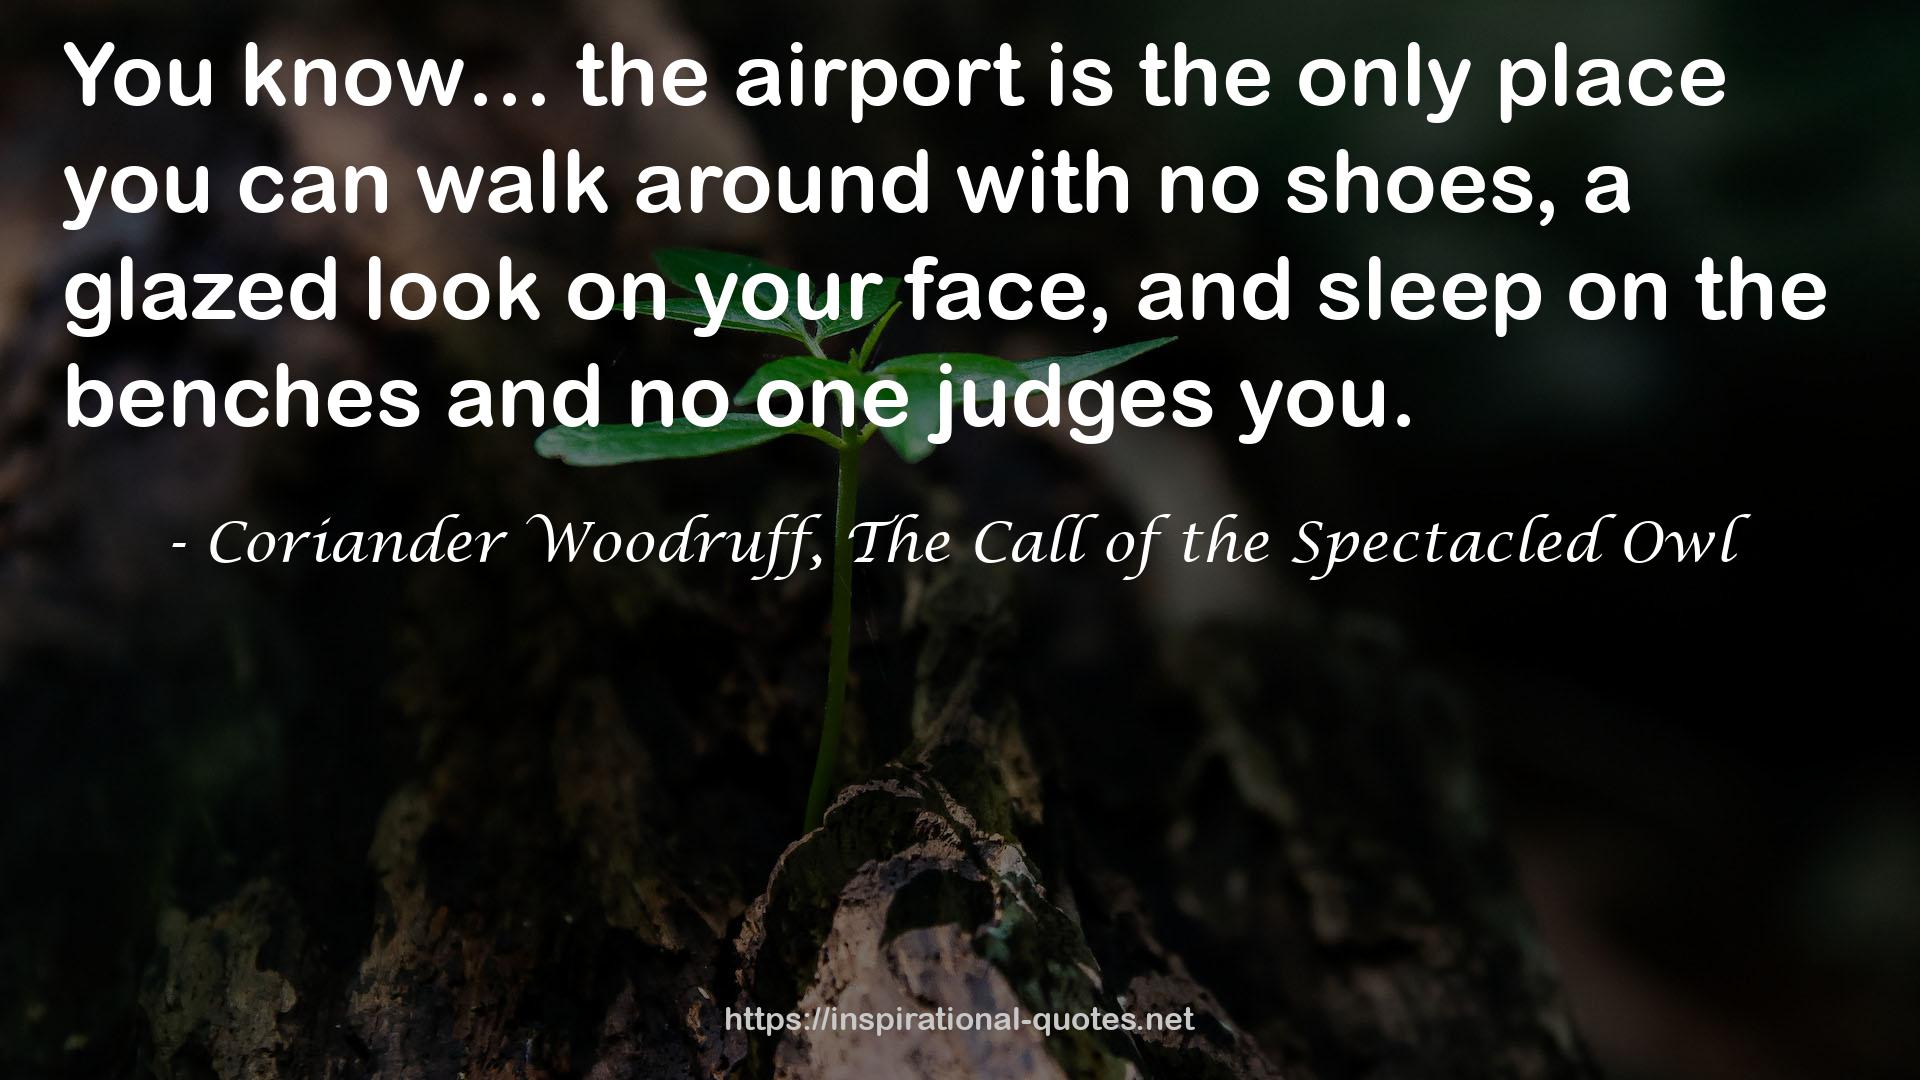 Coriander Woodruff, The Call of the Spectacled Owl QUOTES